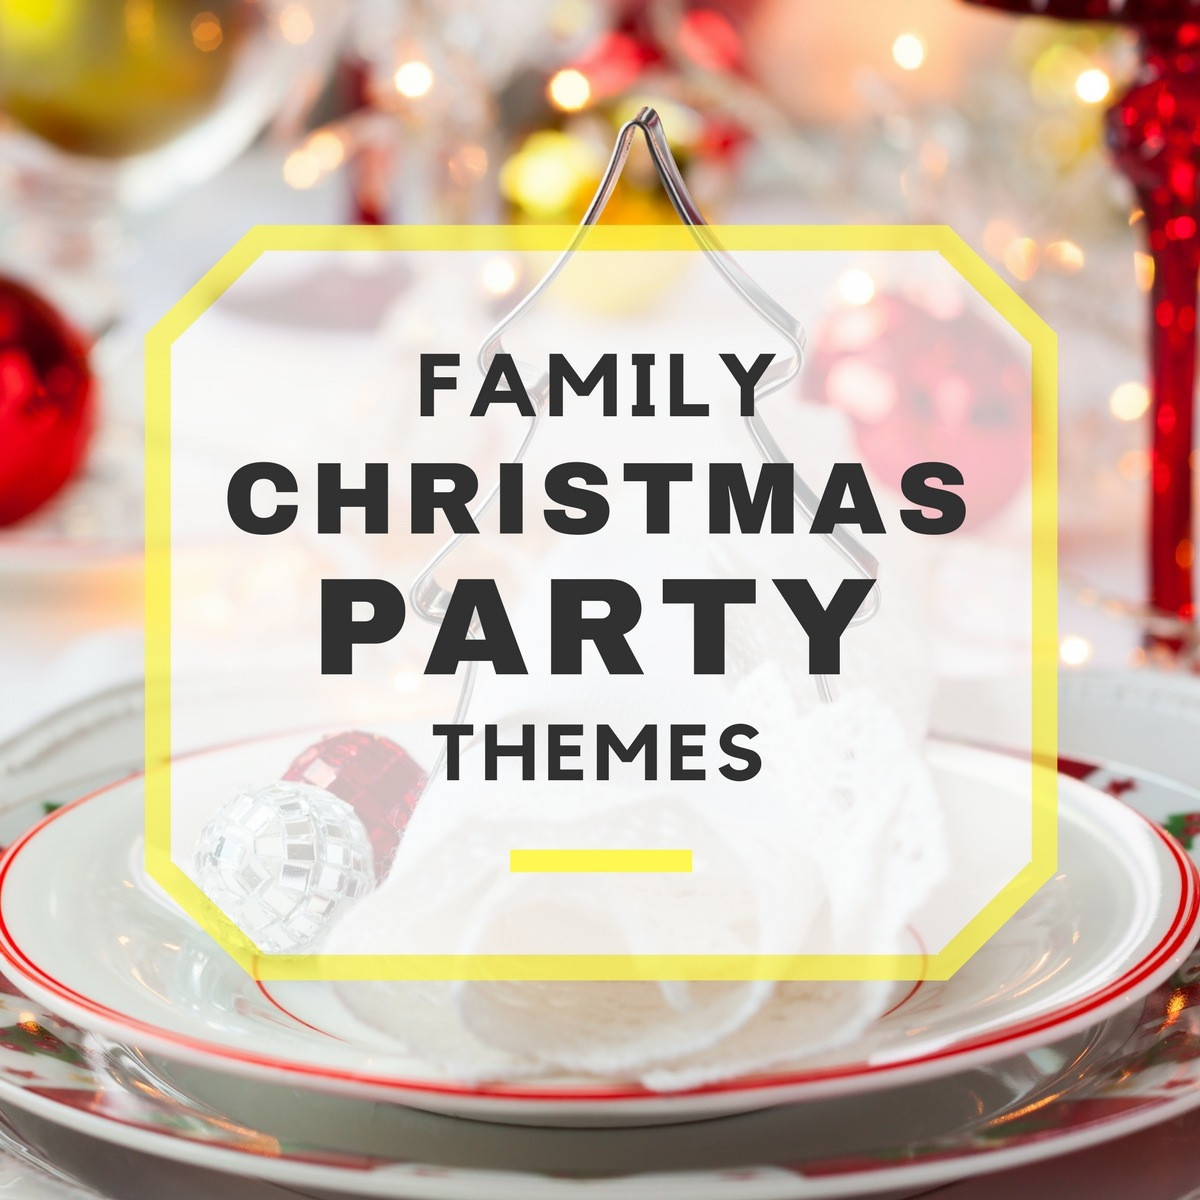 Family Holiday Party Ideas
 Family Christmas Party Themes